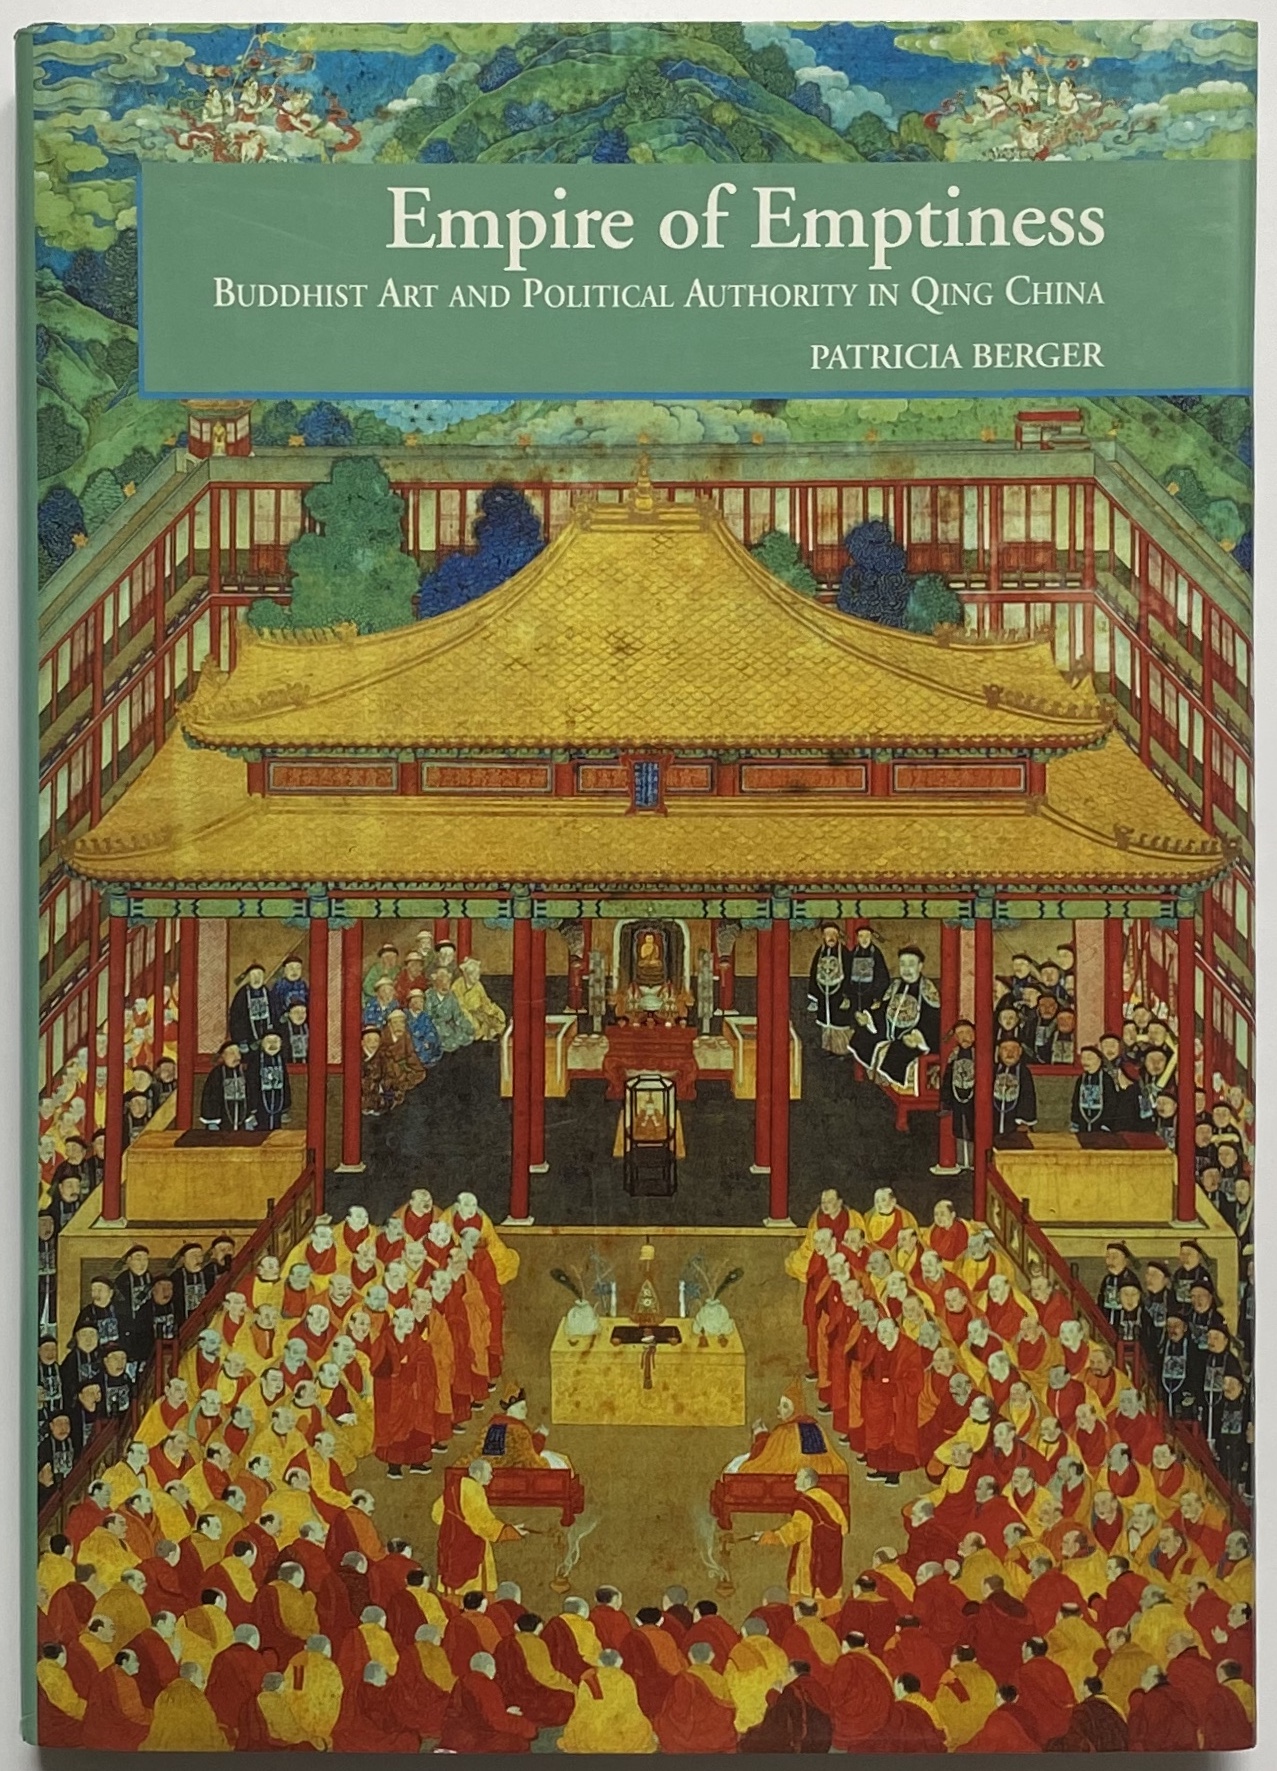 Empire of Emptiness: Buddhist Art and Political Authority in Qing China - Patricia Berger